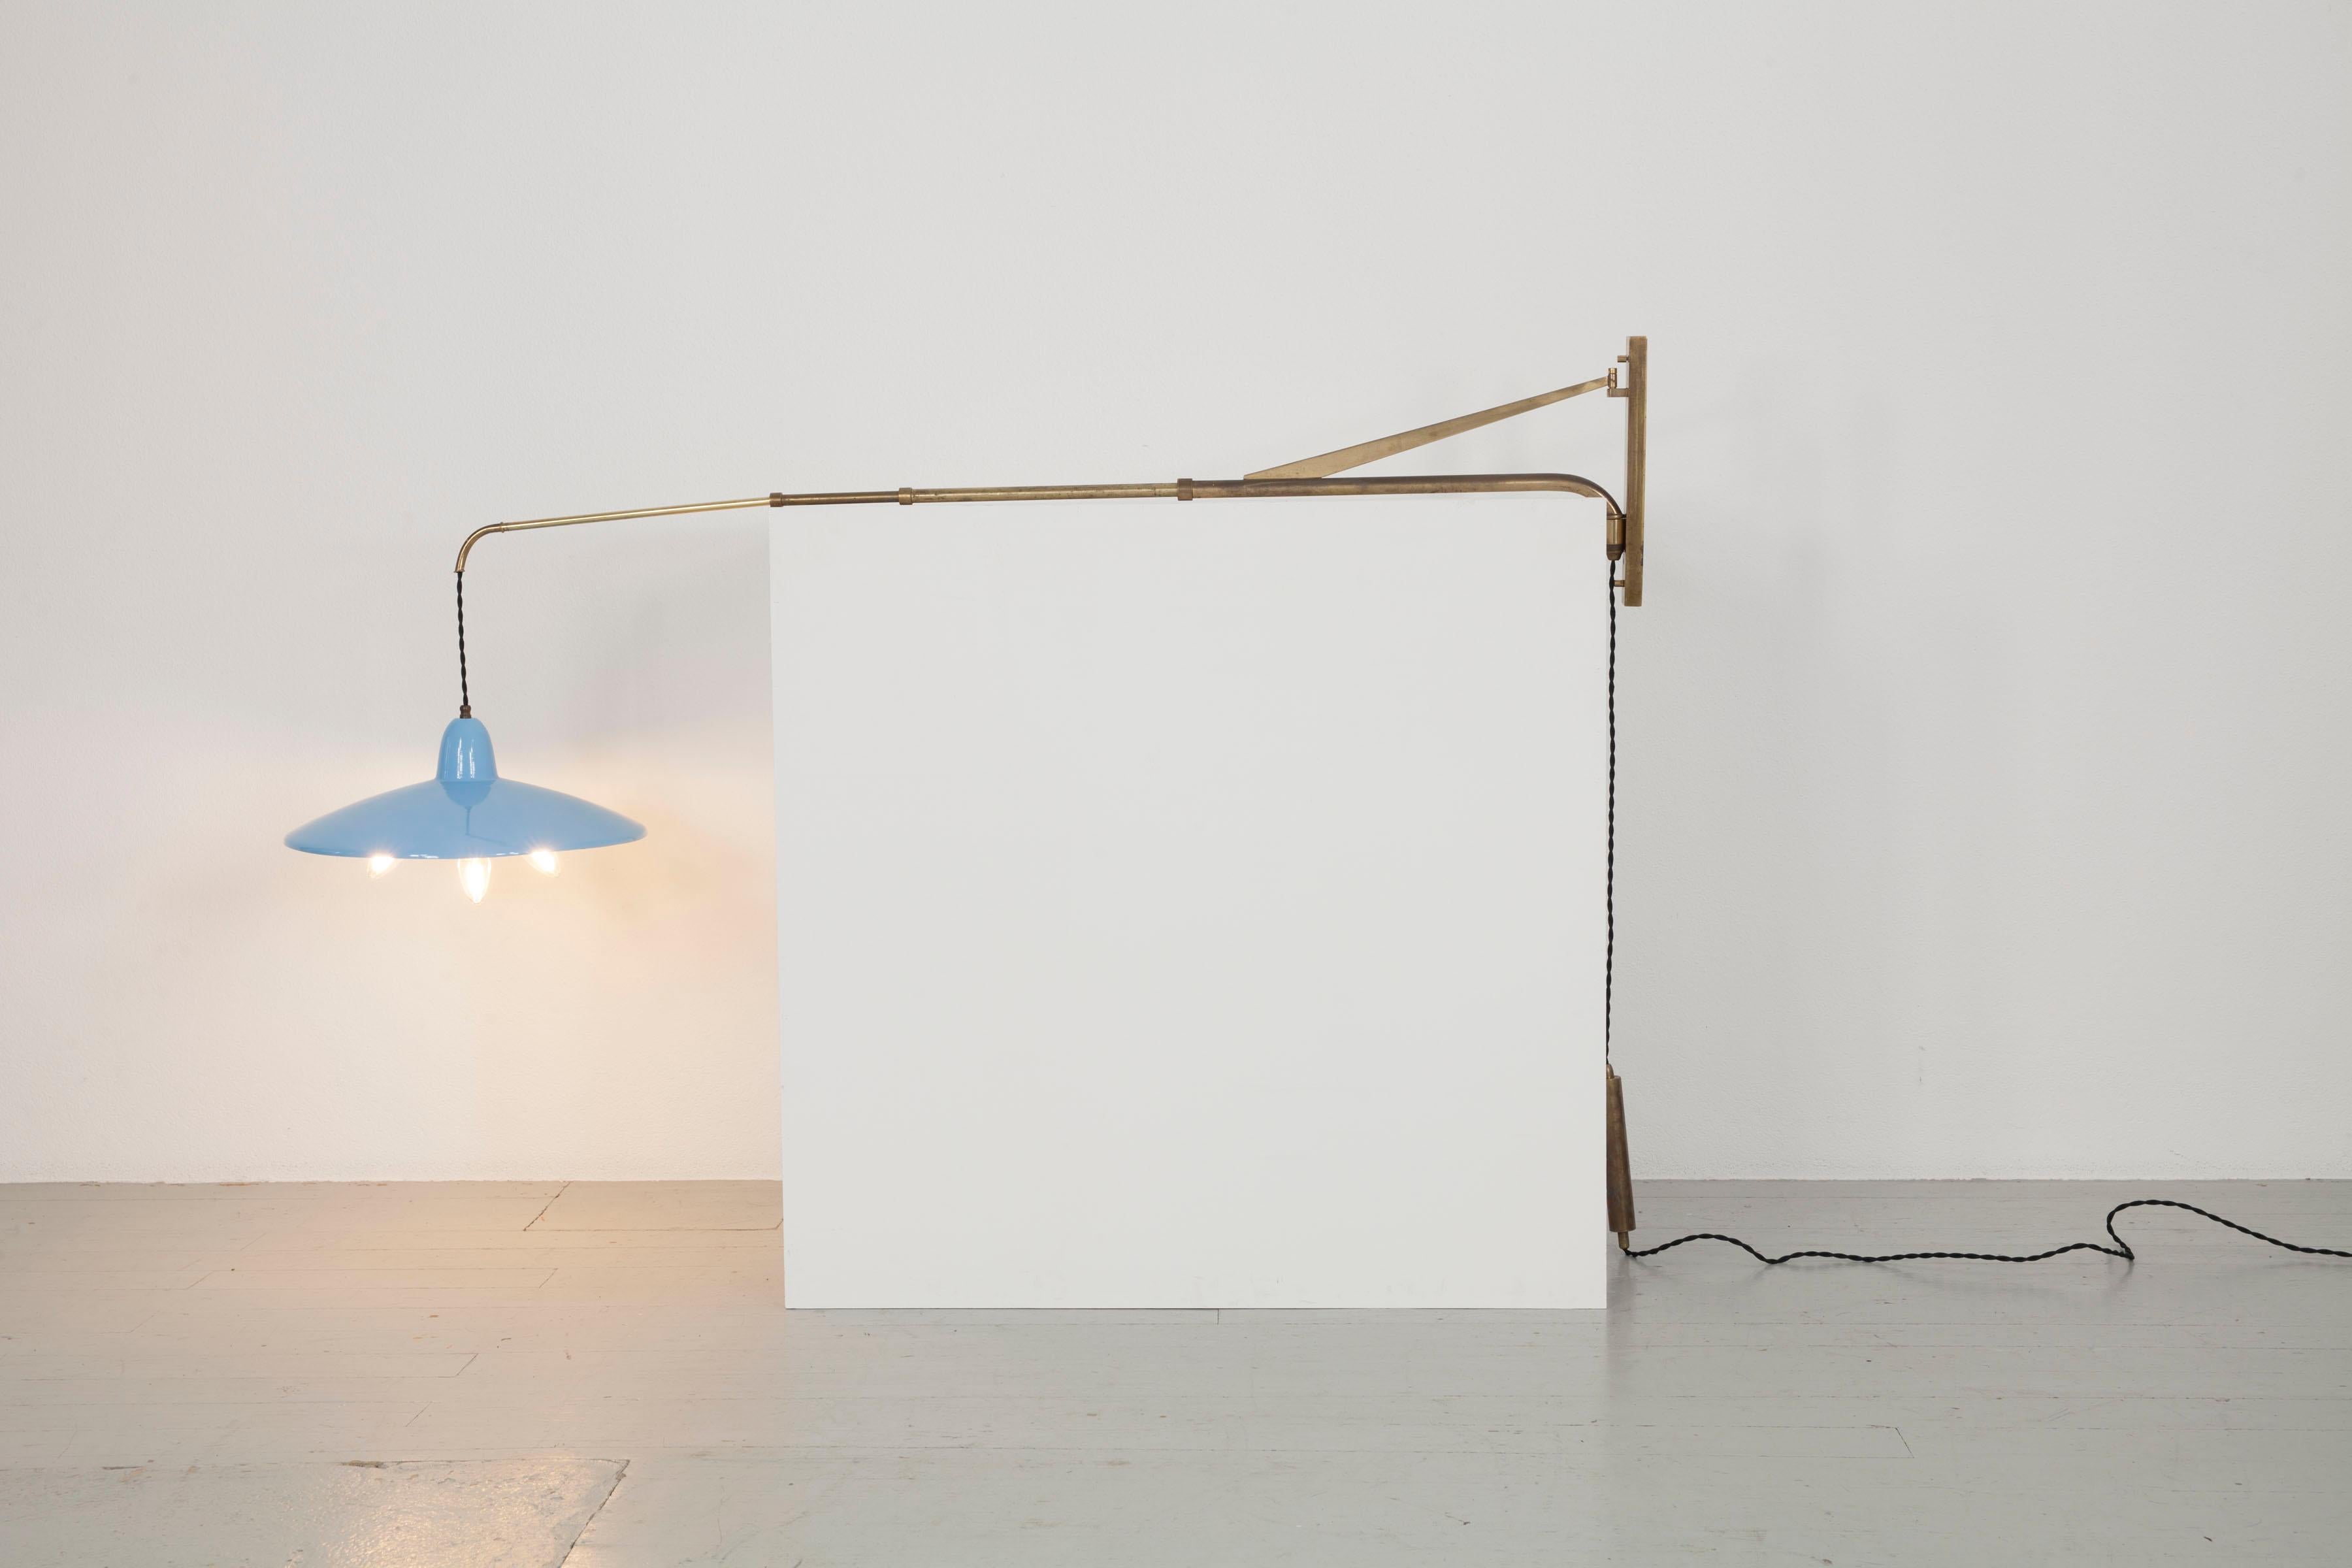 Pivoting height-adjustable Italian telescopic wall light from the 1950s. The shade is made of light blue lacquered aluminum.
Length: 60 - 152 cm, shade: ø 40 cm x 15 cm, brass wall bracket: 29 cm, 
Brass counterweight on the cable: 21 cm - the shade